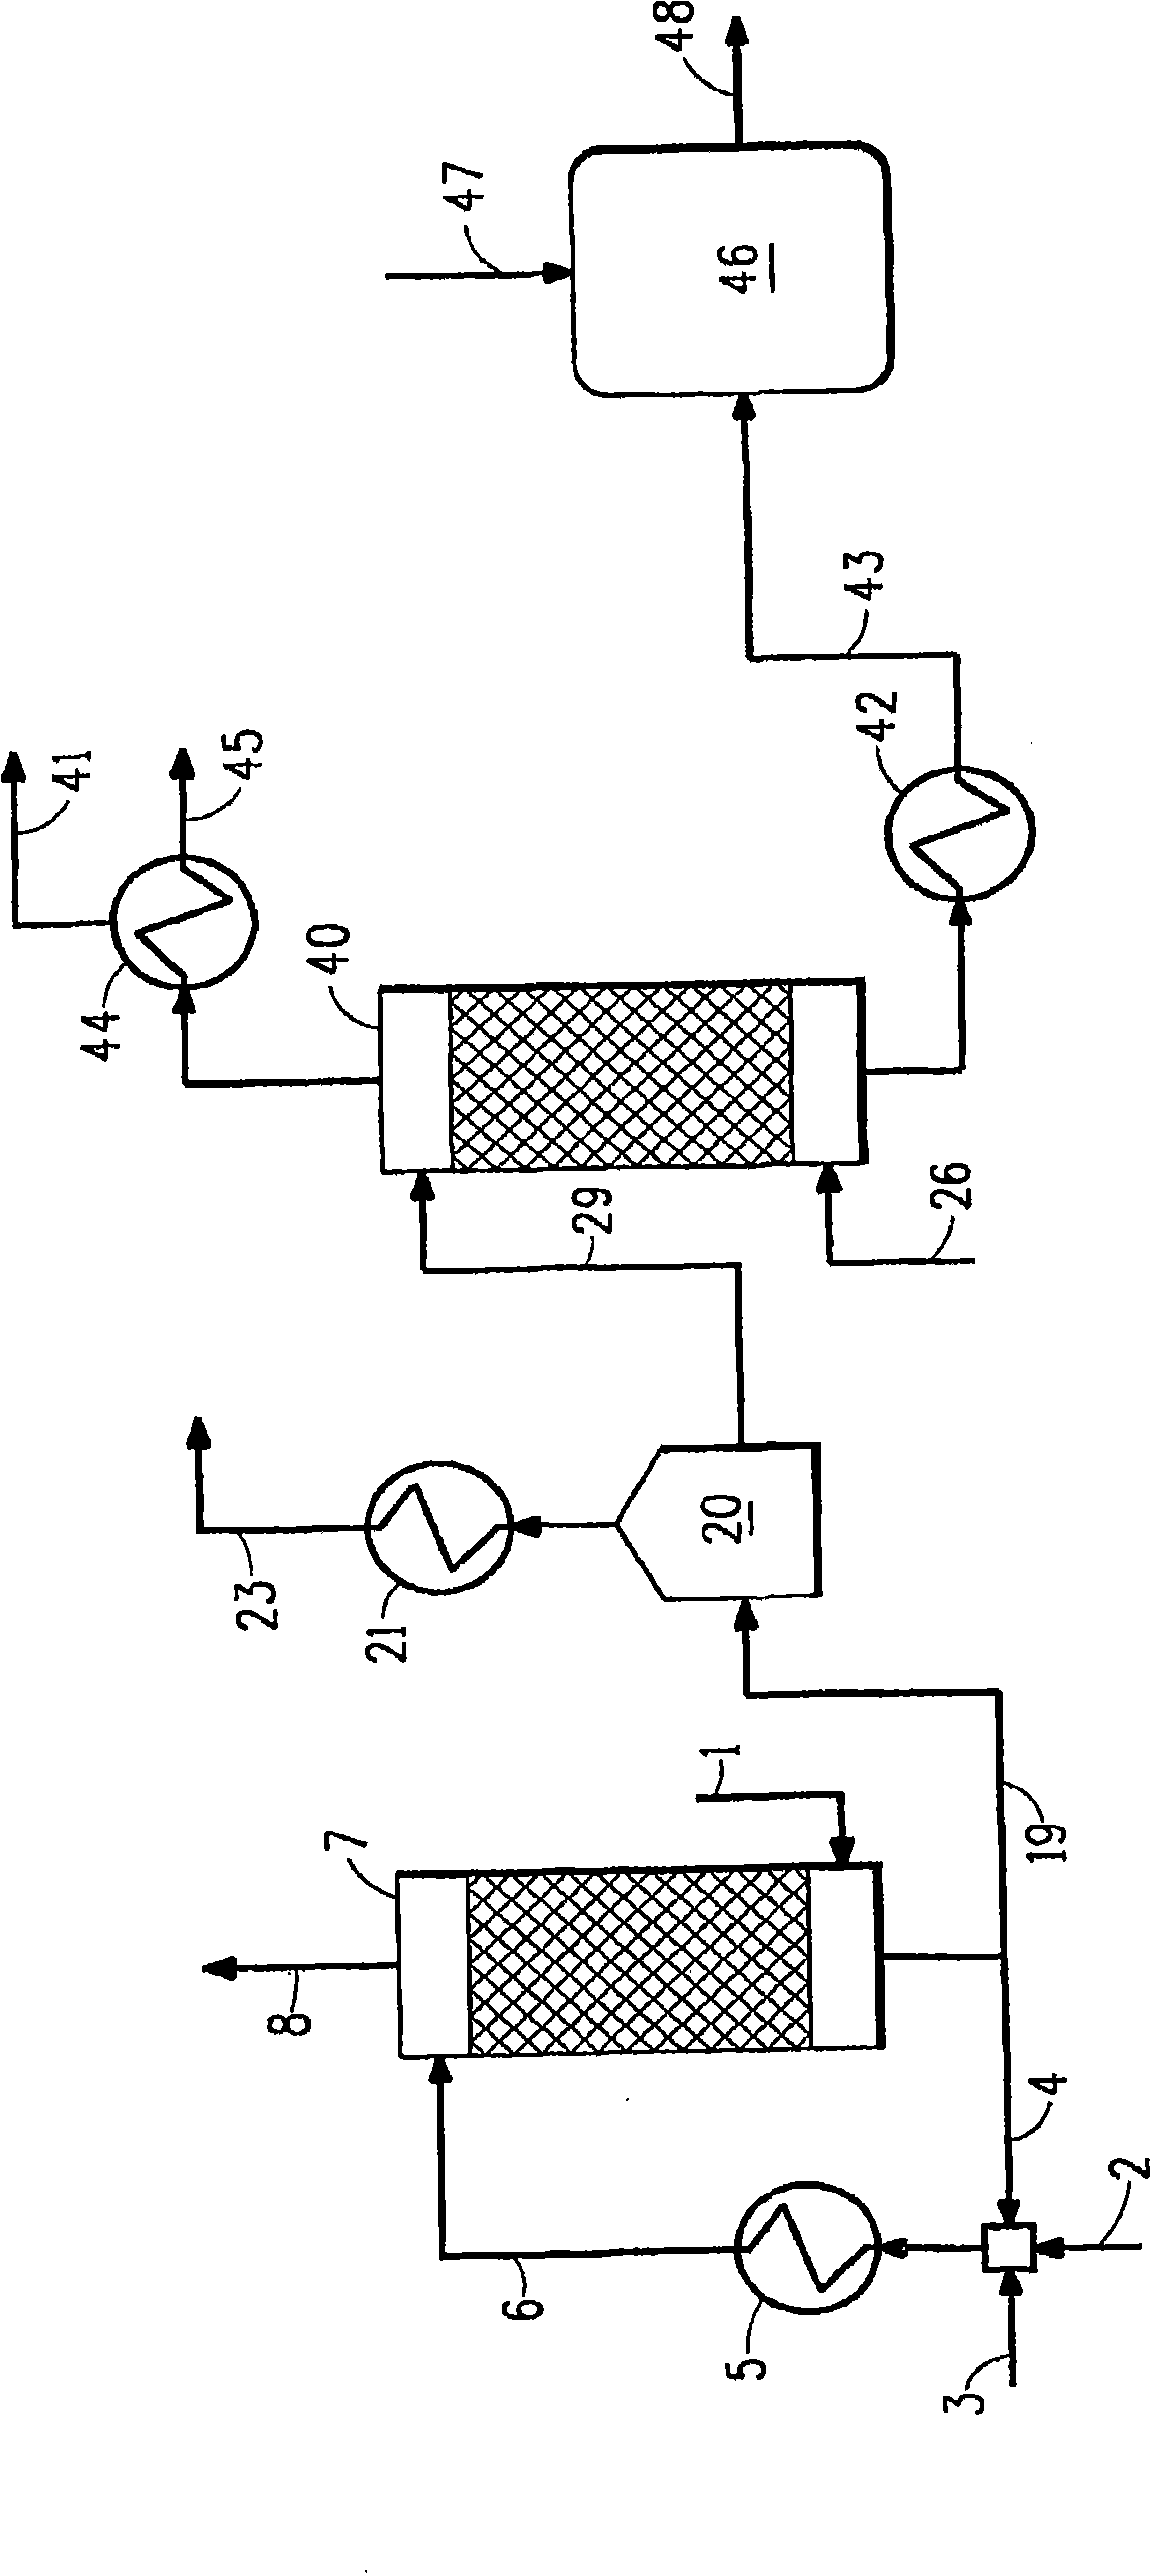 Process for scrubbing ammonia from acid gases comprising ammonia and hydrogen sulfide